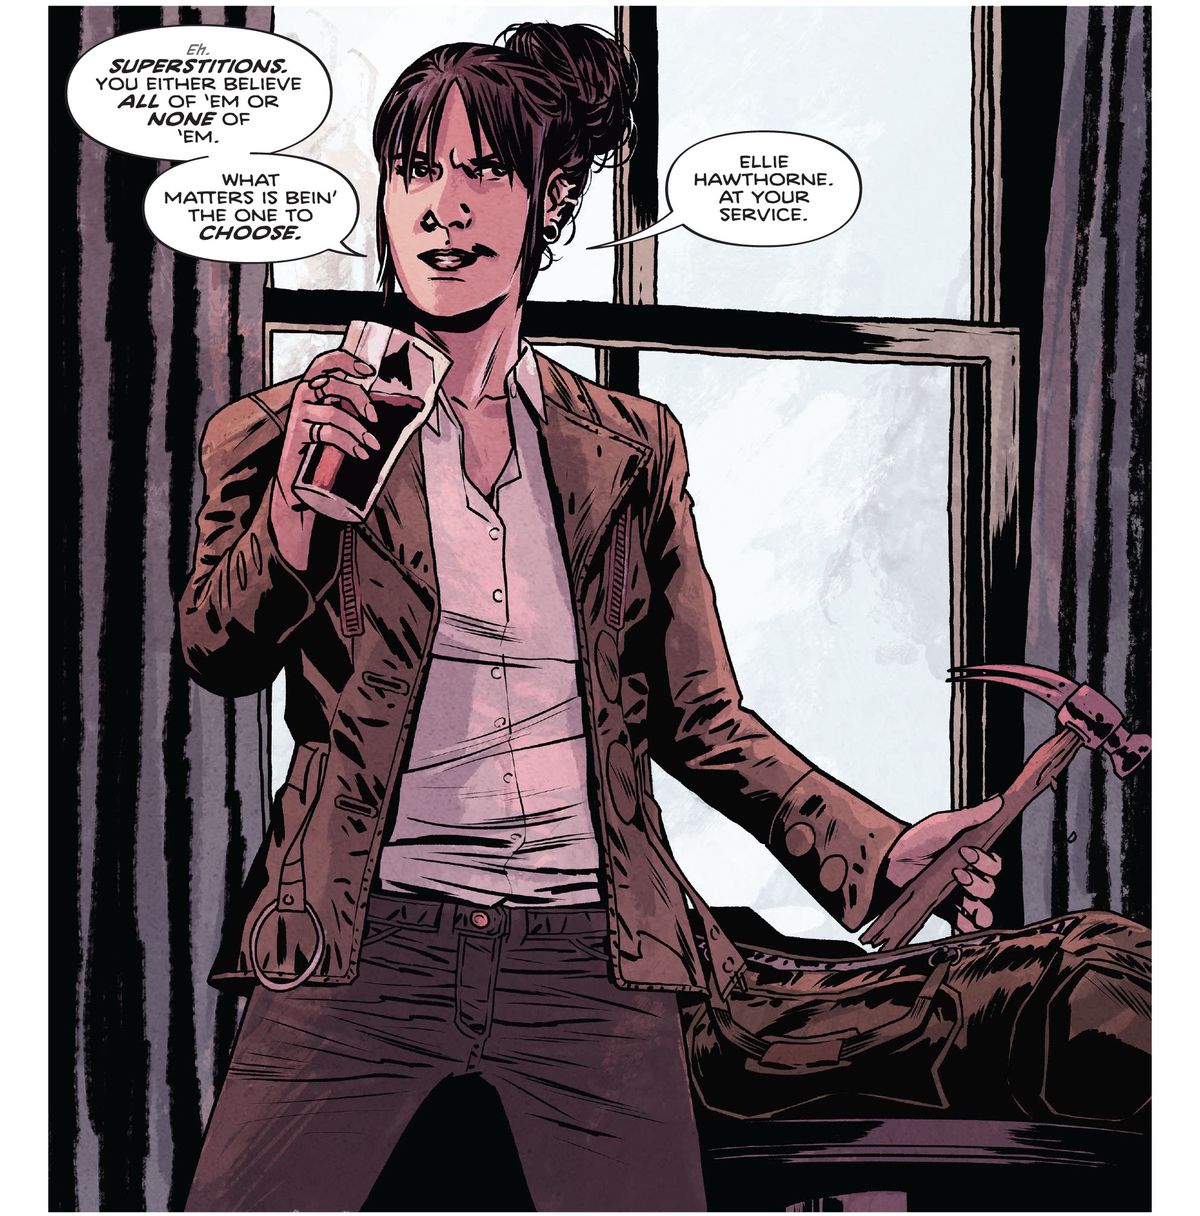 Ellie Hawthorne hefts a pint of ale in one hand and a claw hammer in the other as she introduces herself. “Superstitions. You either believe all of ‘em or none of ‘em. What matters is bein’ the one to choose.” in Damn Them All #1 (2022). 